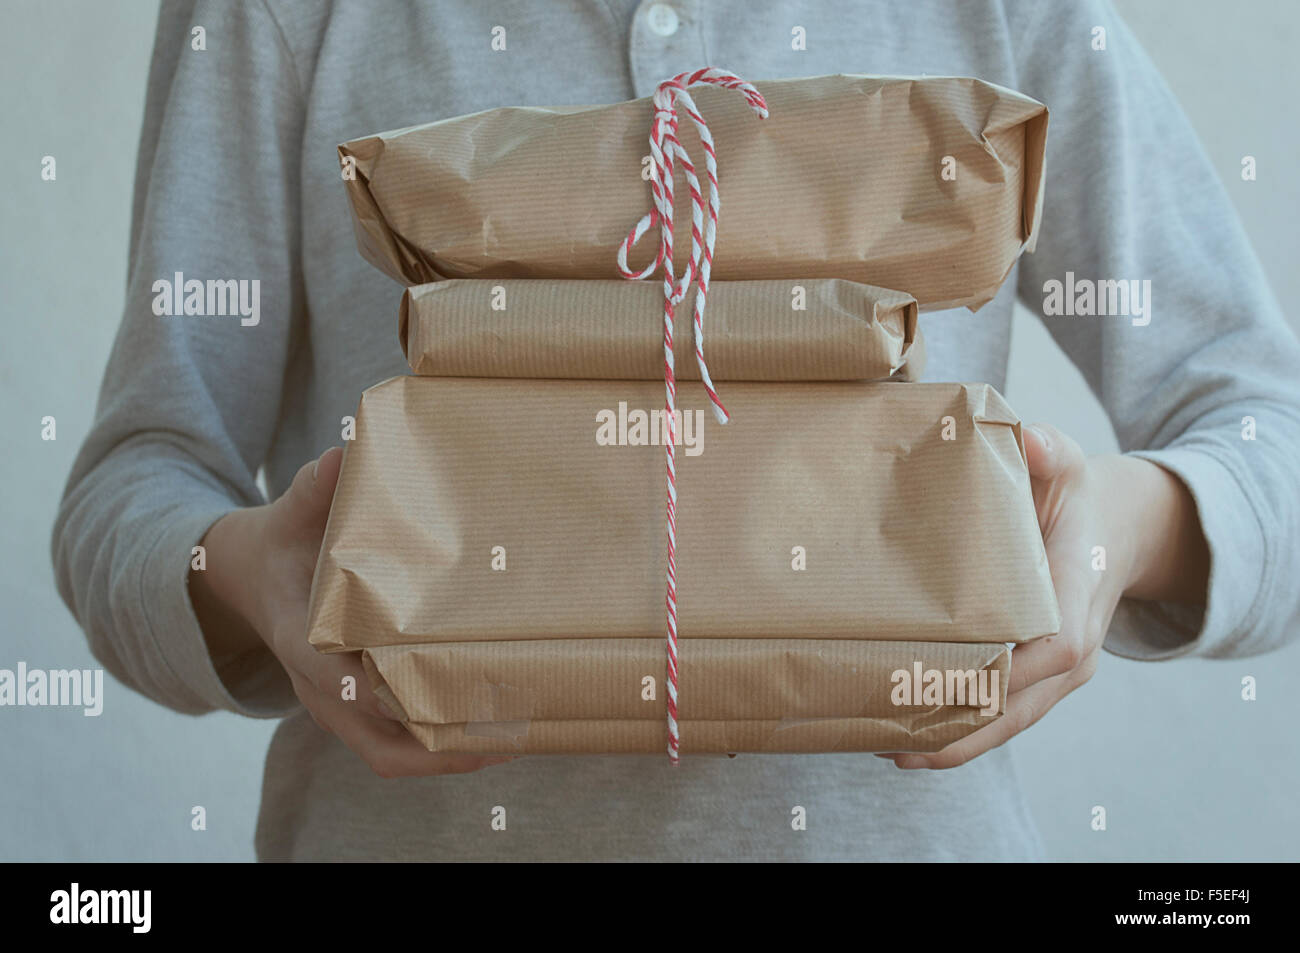 Boy holding a stack of presents Stock Photo